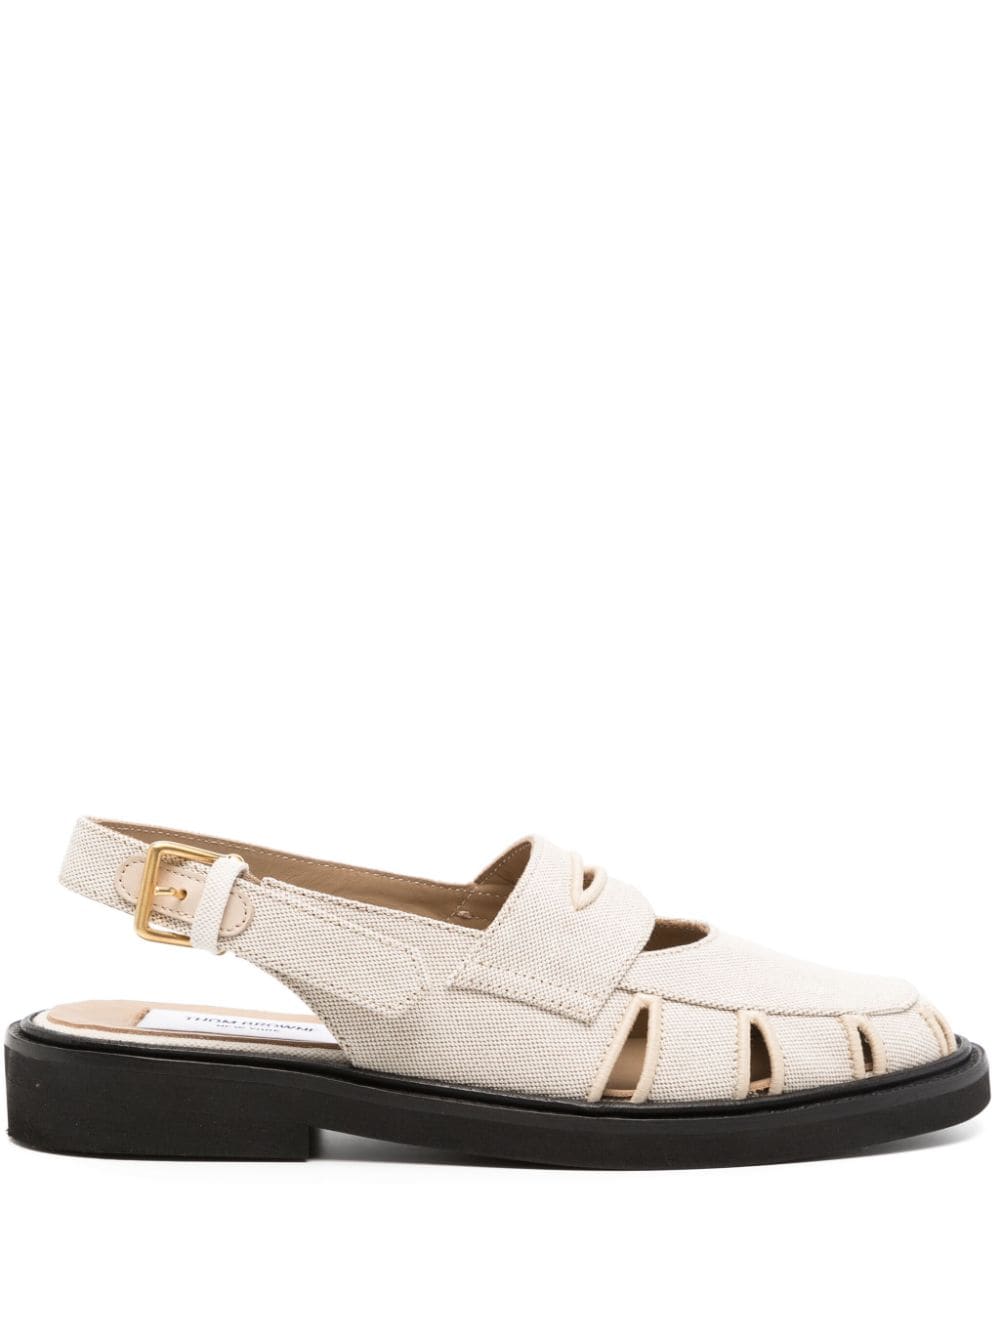 Thom Browne cut-out detailing cotton sandals - Nude von Thom Browne